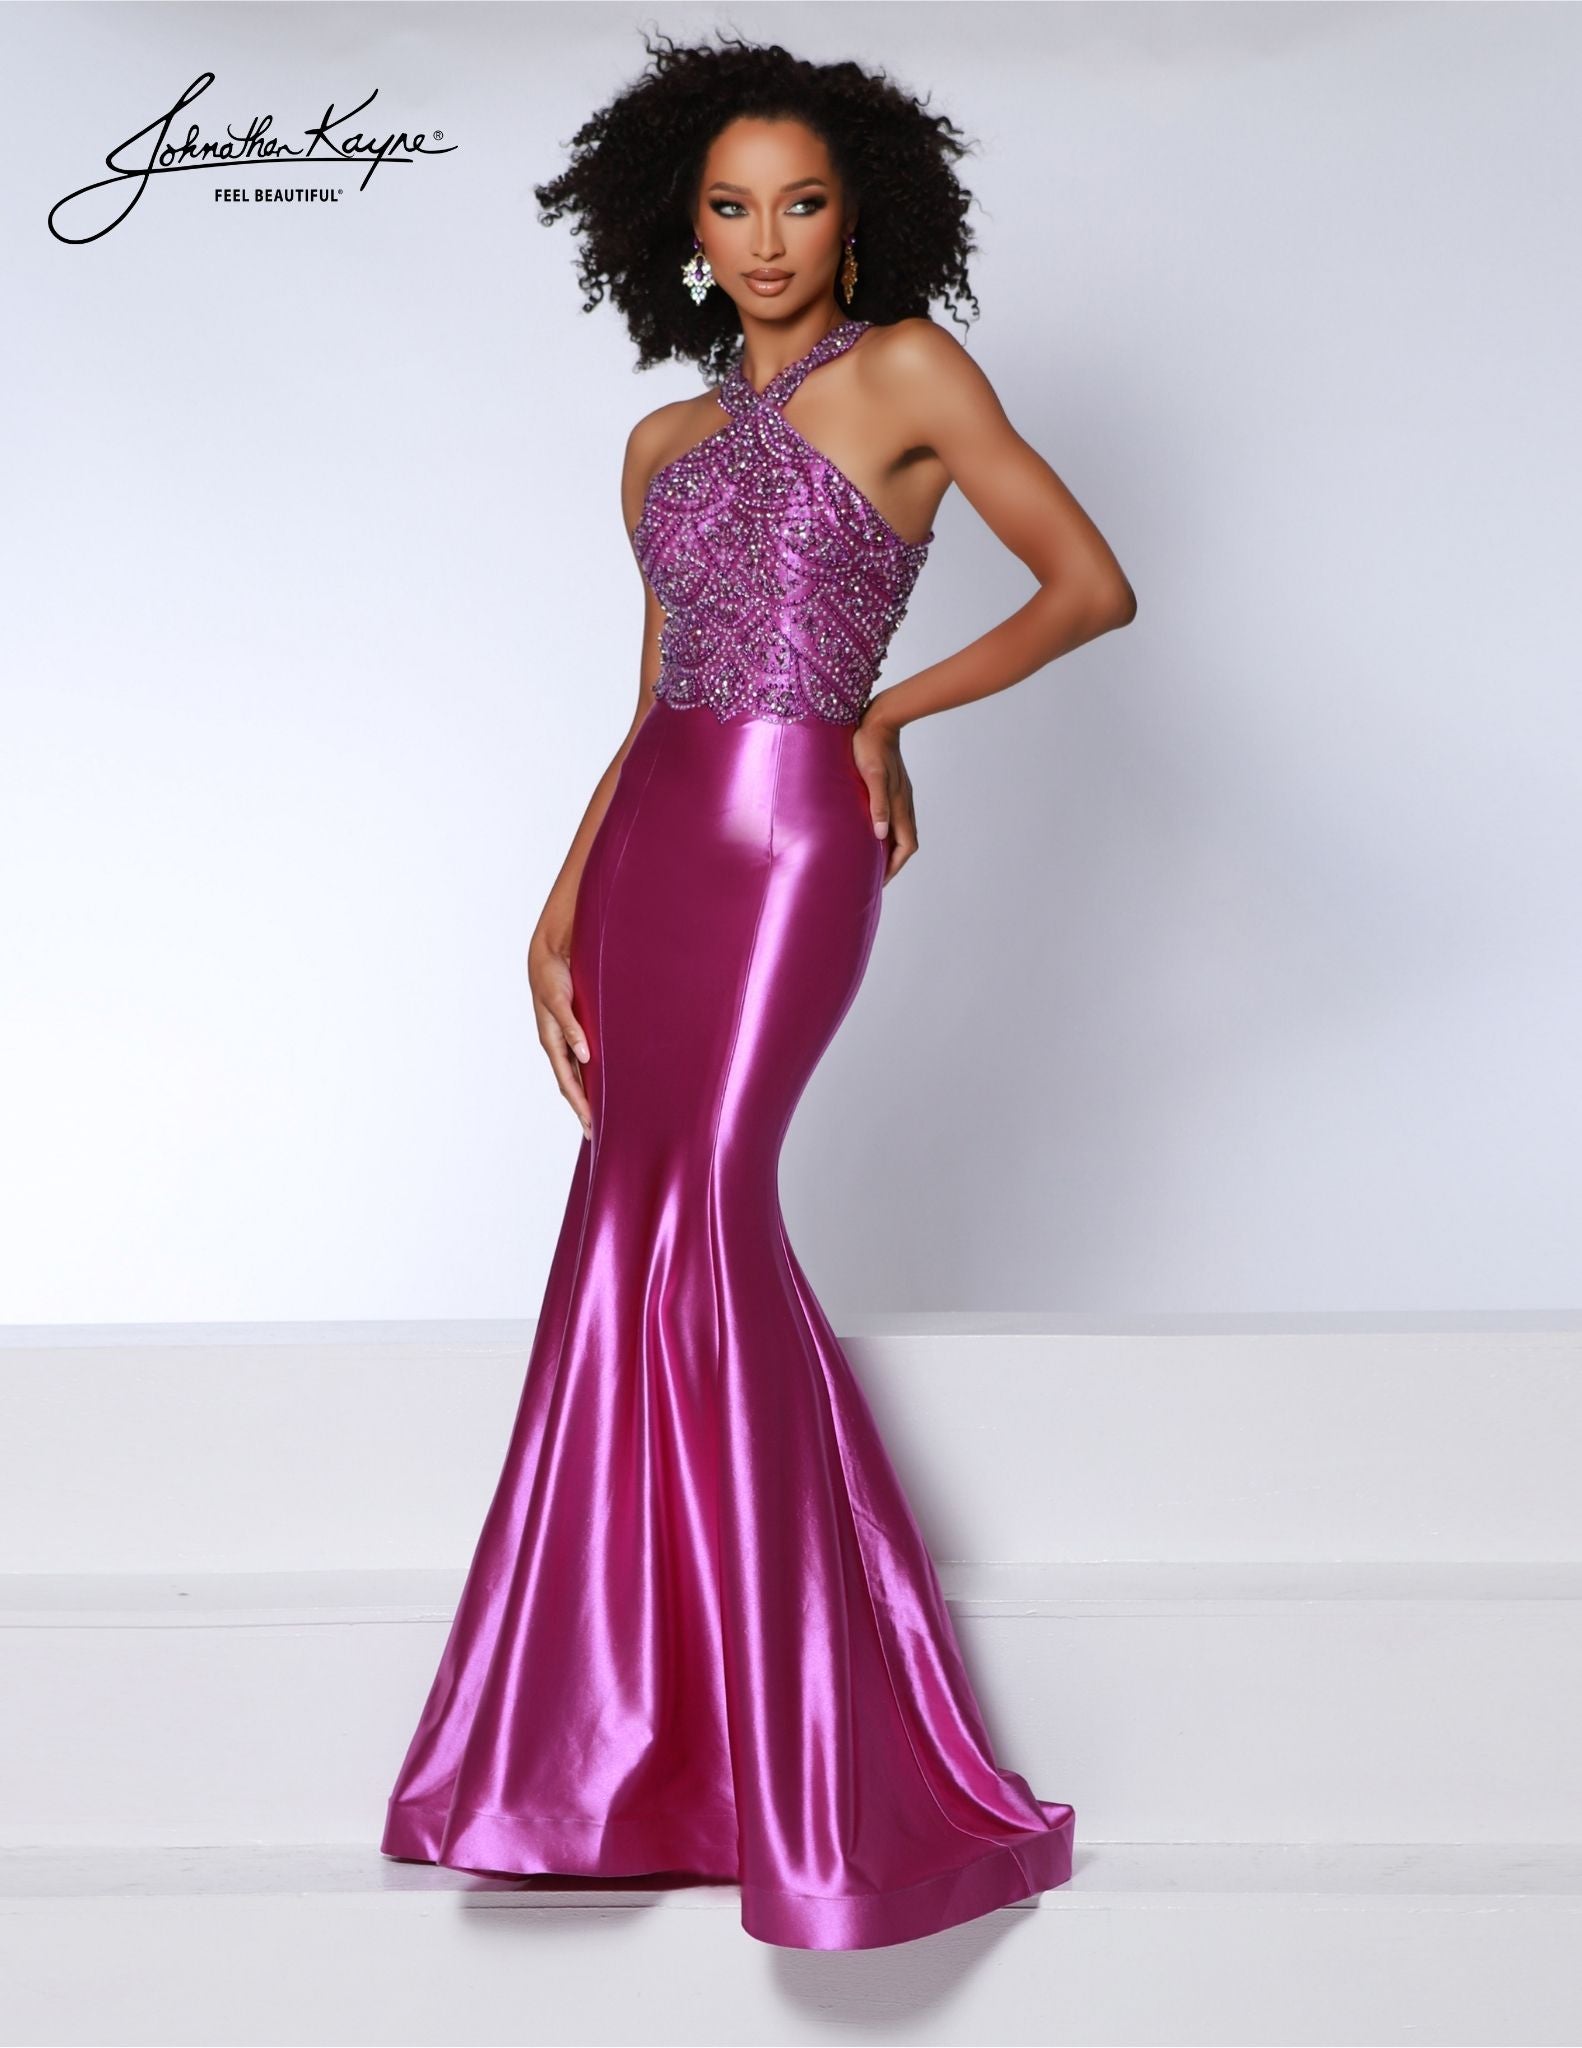 Johnathan Kayne 2839 Long Prom Dress is a stunning formal gown crafted with exquisite beadwork. Showcasing a halter neckline and an open back, it's a glamorous choice for prom or pageant. The mermaid silhouette creates a stunning look with every step. 